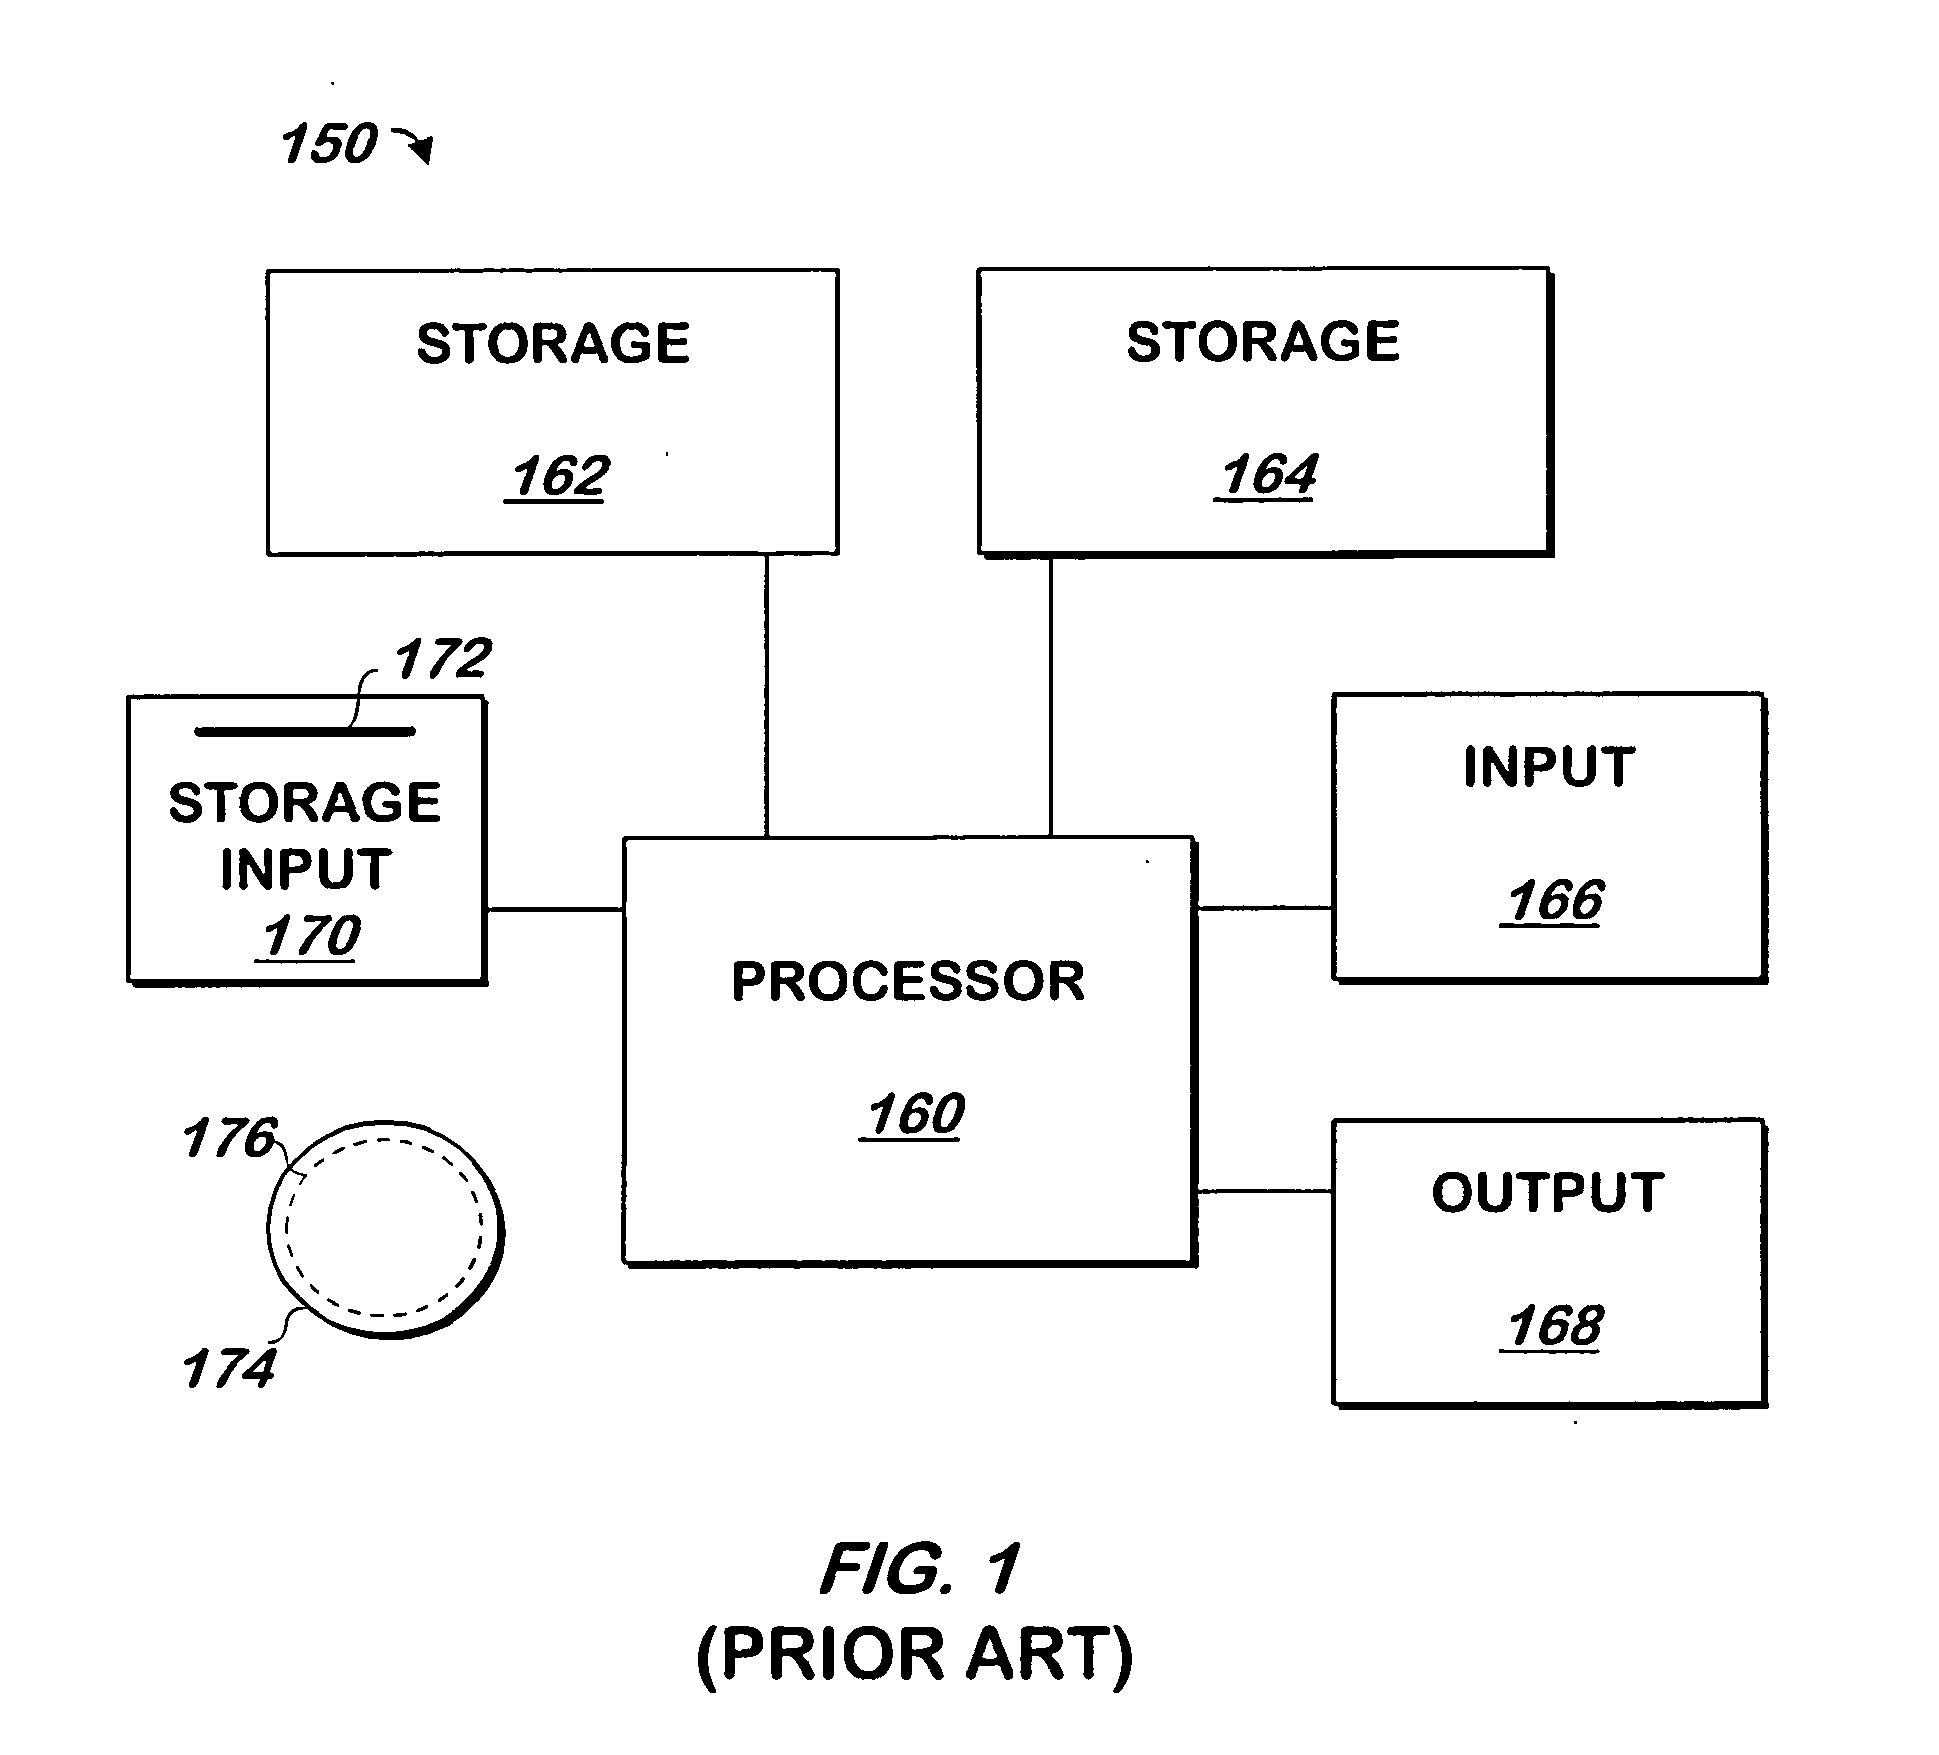 System and method for accurately displaying communications traffic information